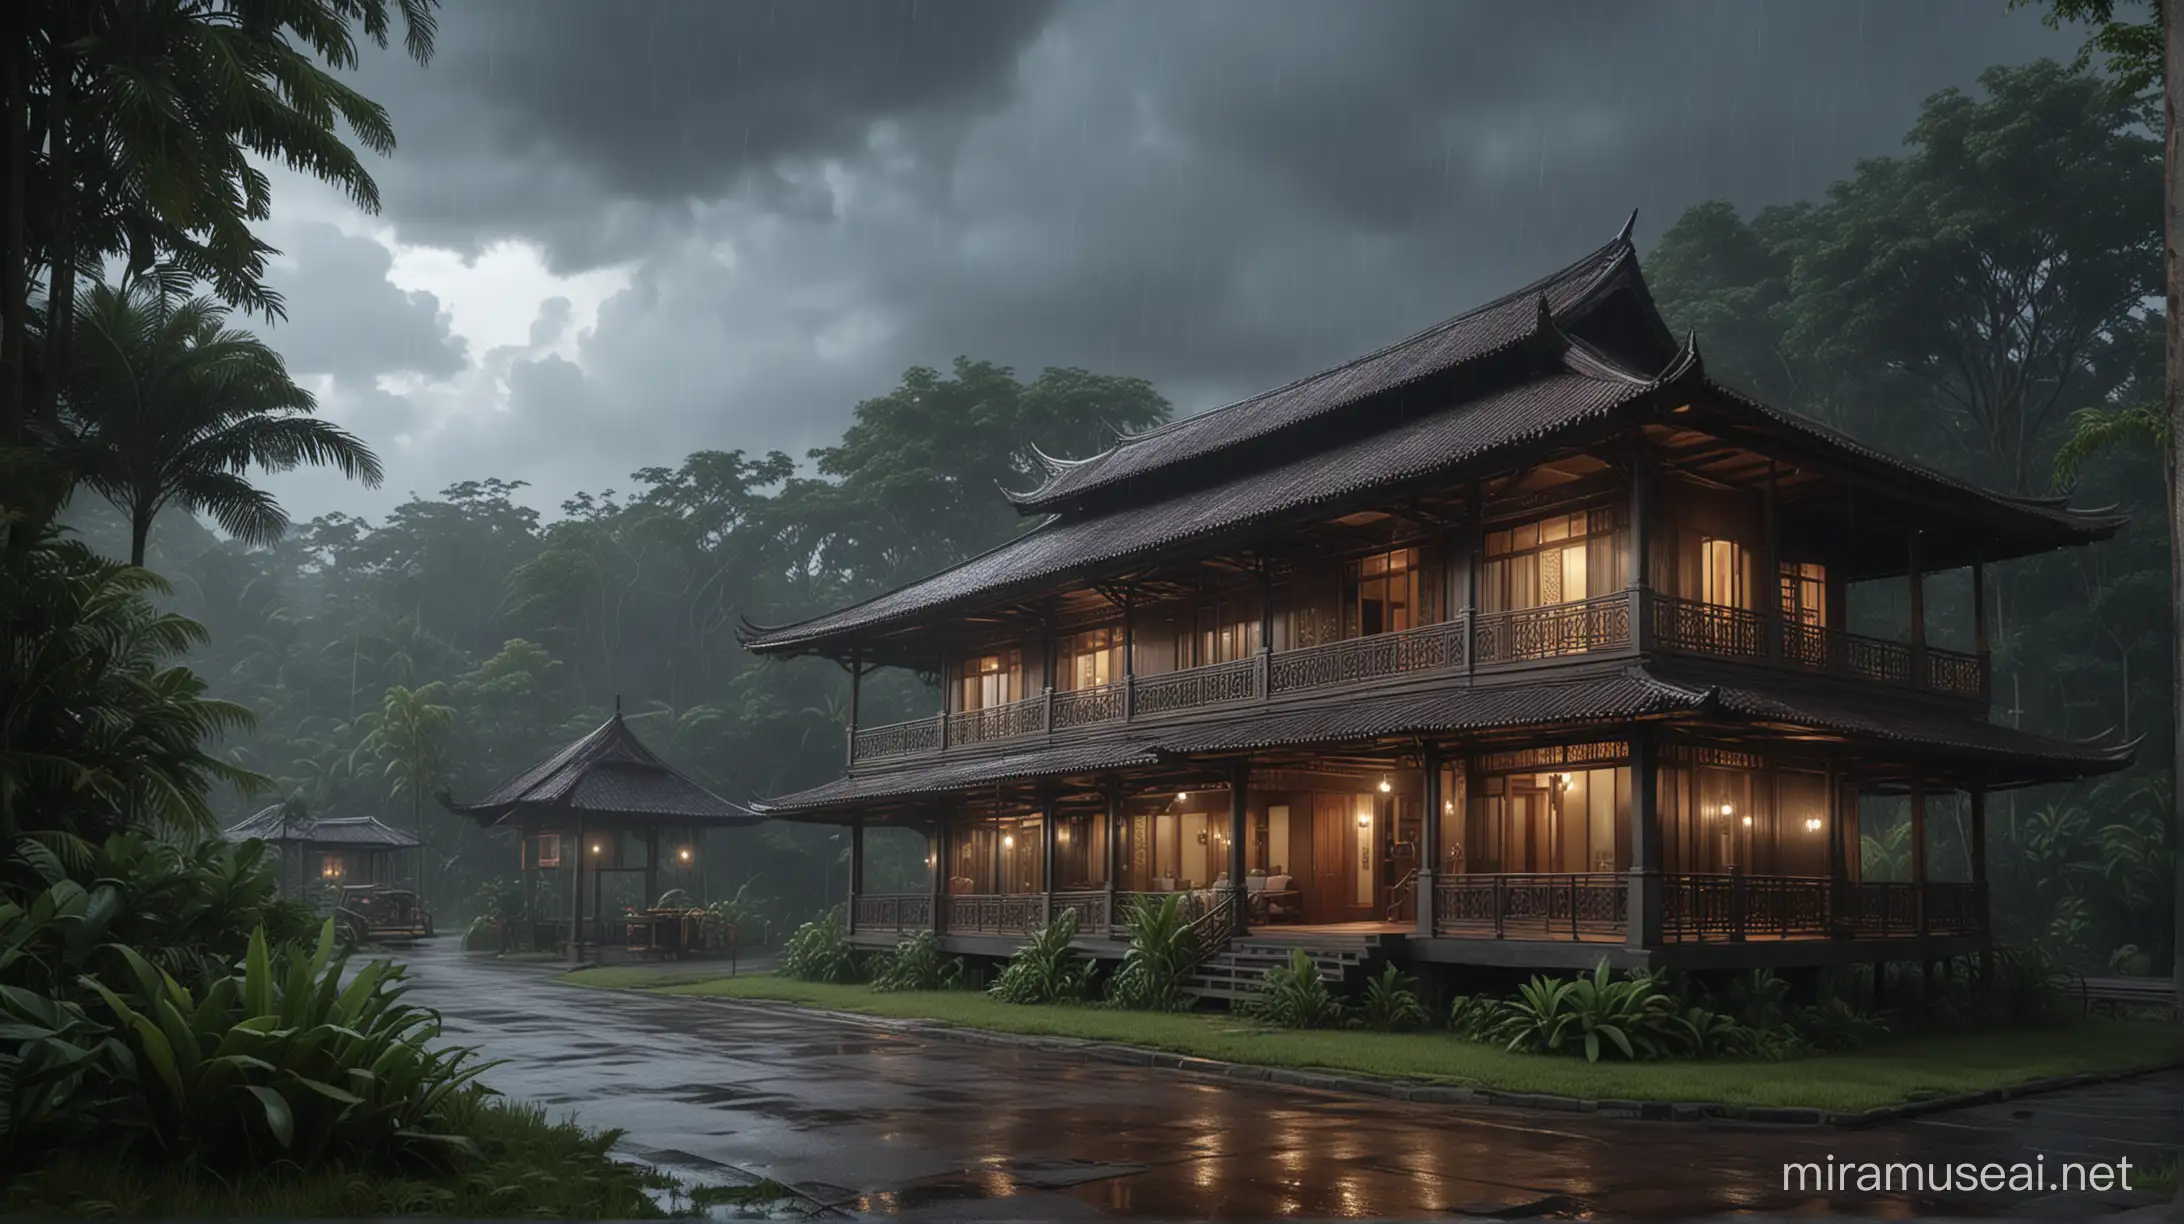 Indonesian Javanese House in Forest Hills on a Rainy Night